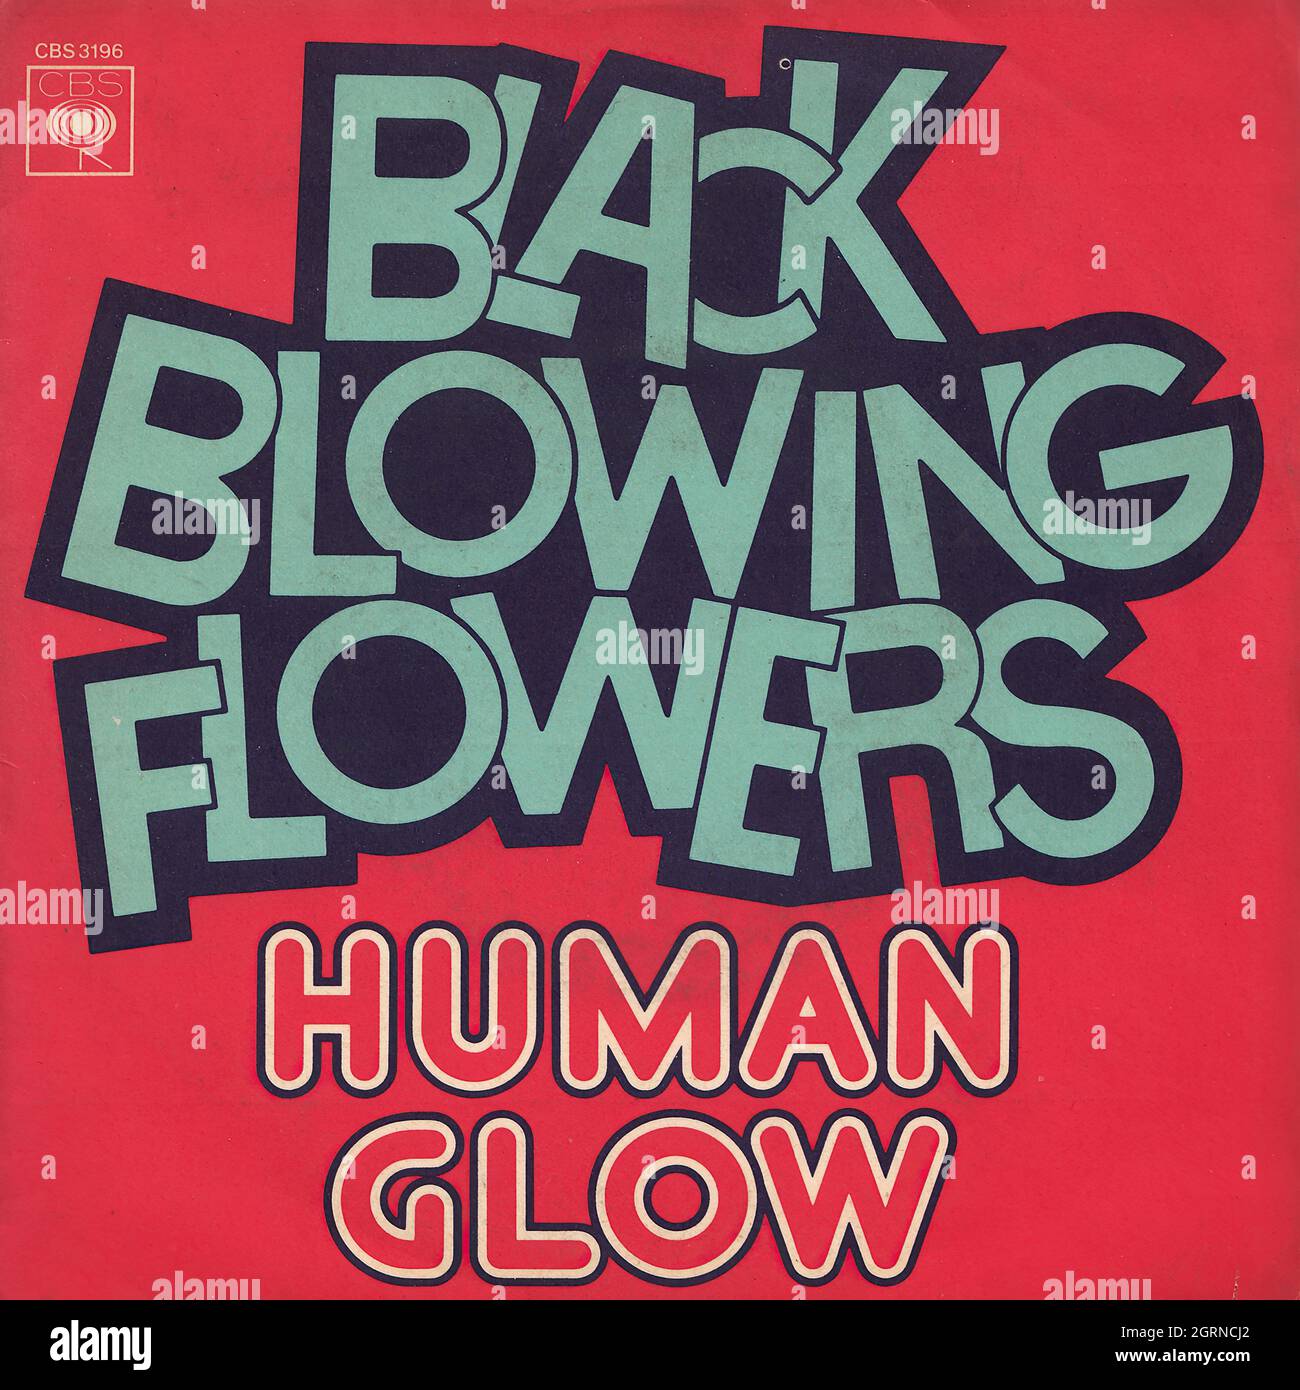 Black Blowing Flowers - Human glow - Uskudarra 45rpm - Vintage Vinyl Record Cover Stock Photo